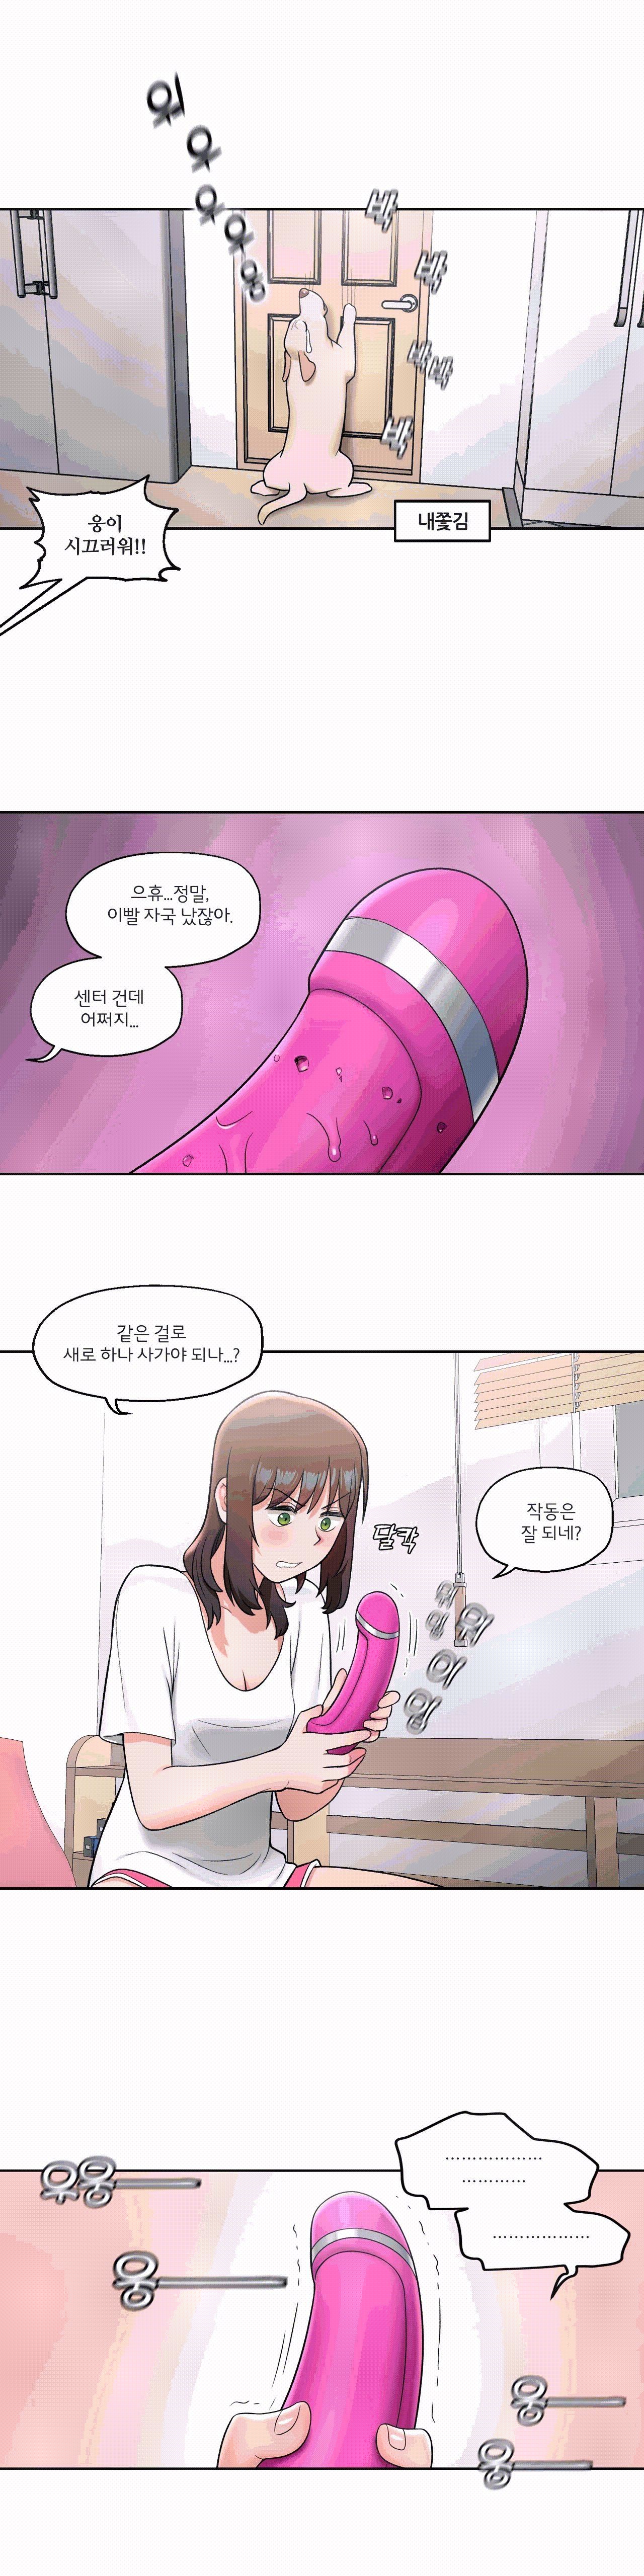 Sexercise Raw - Chapter 30 Page 24